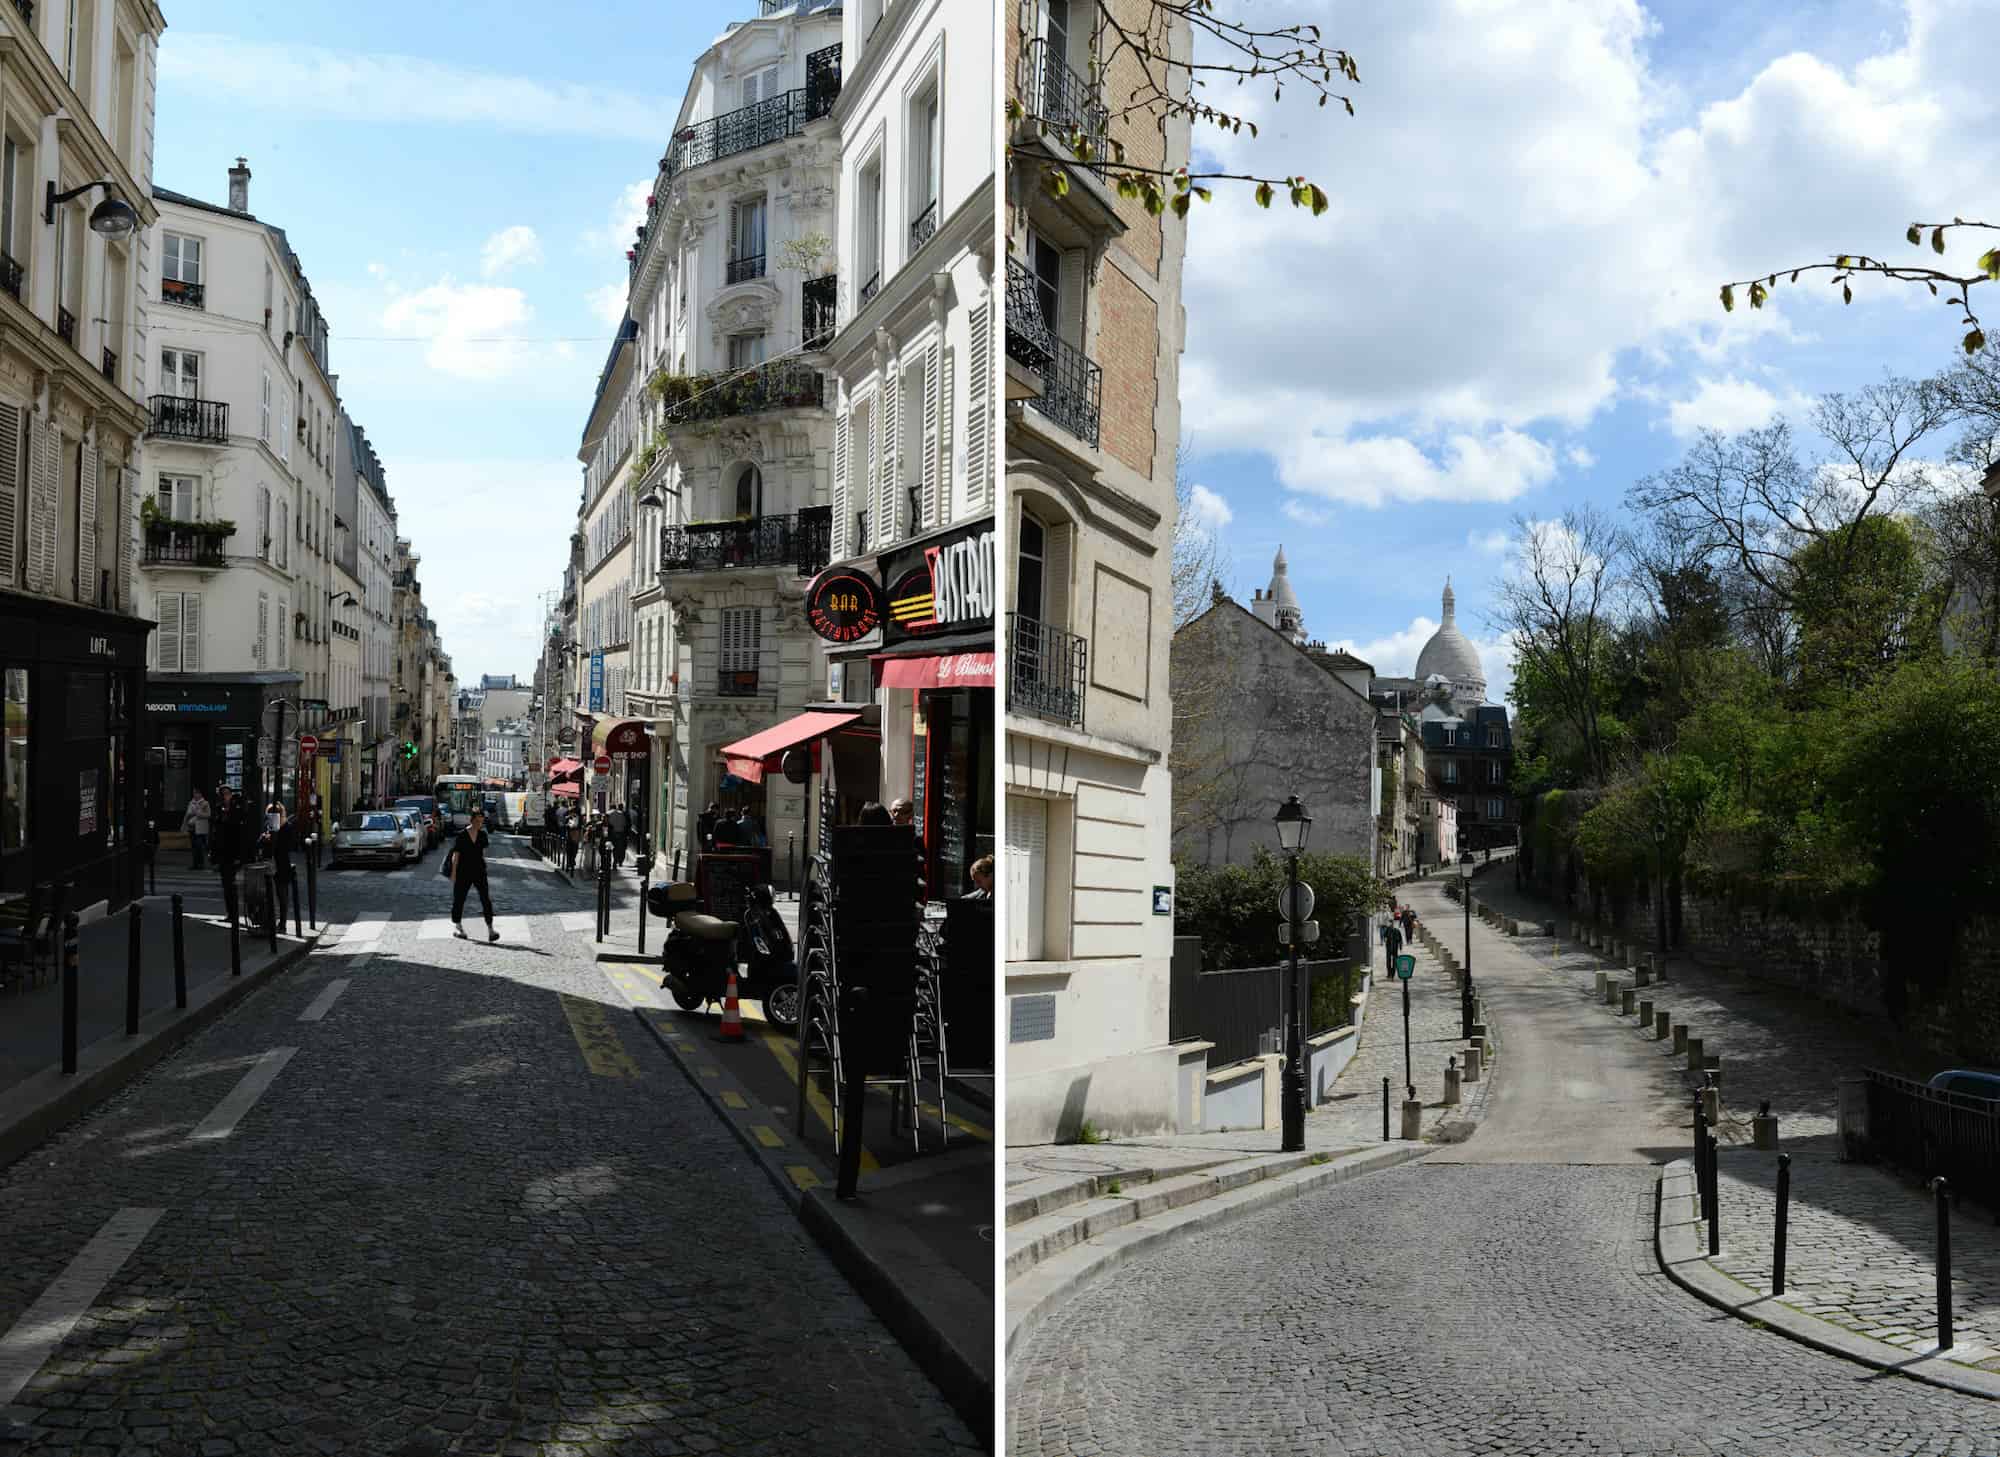 My Montmartre: Food, Coffee, Shopping & More